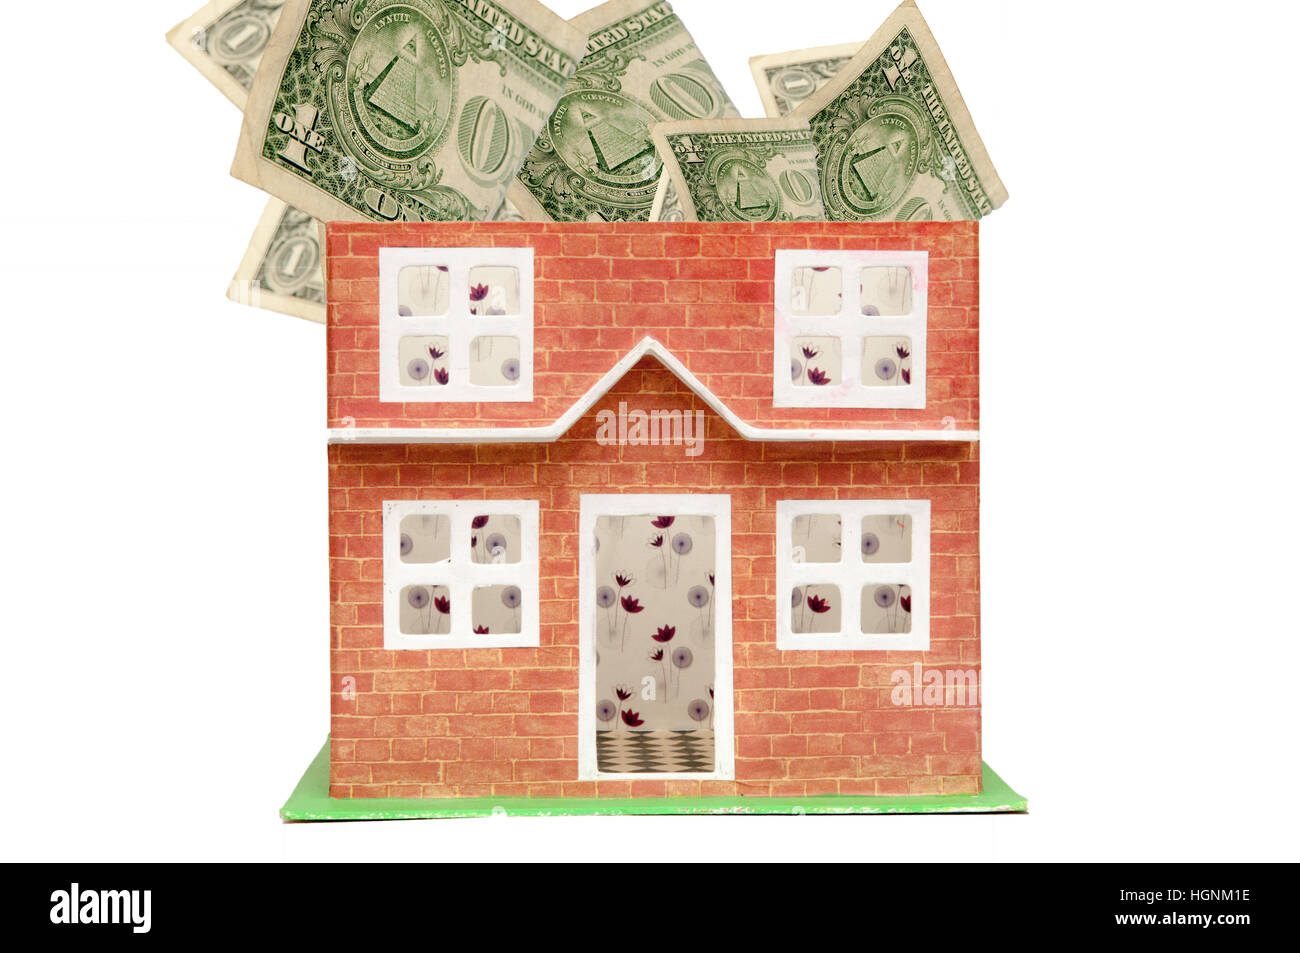 real estate and property prices concept showing the cost of houses Stock Photo